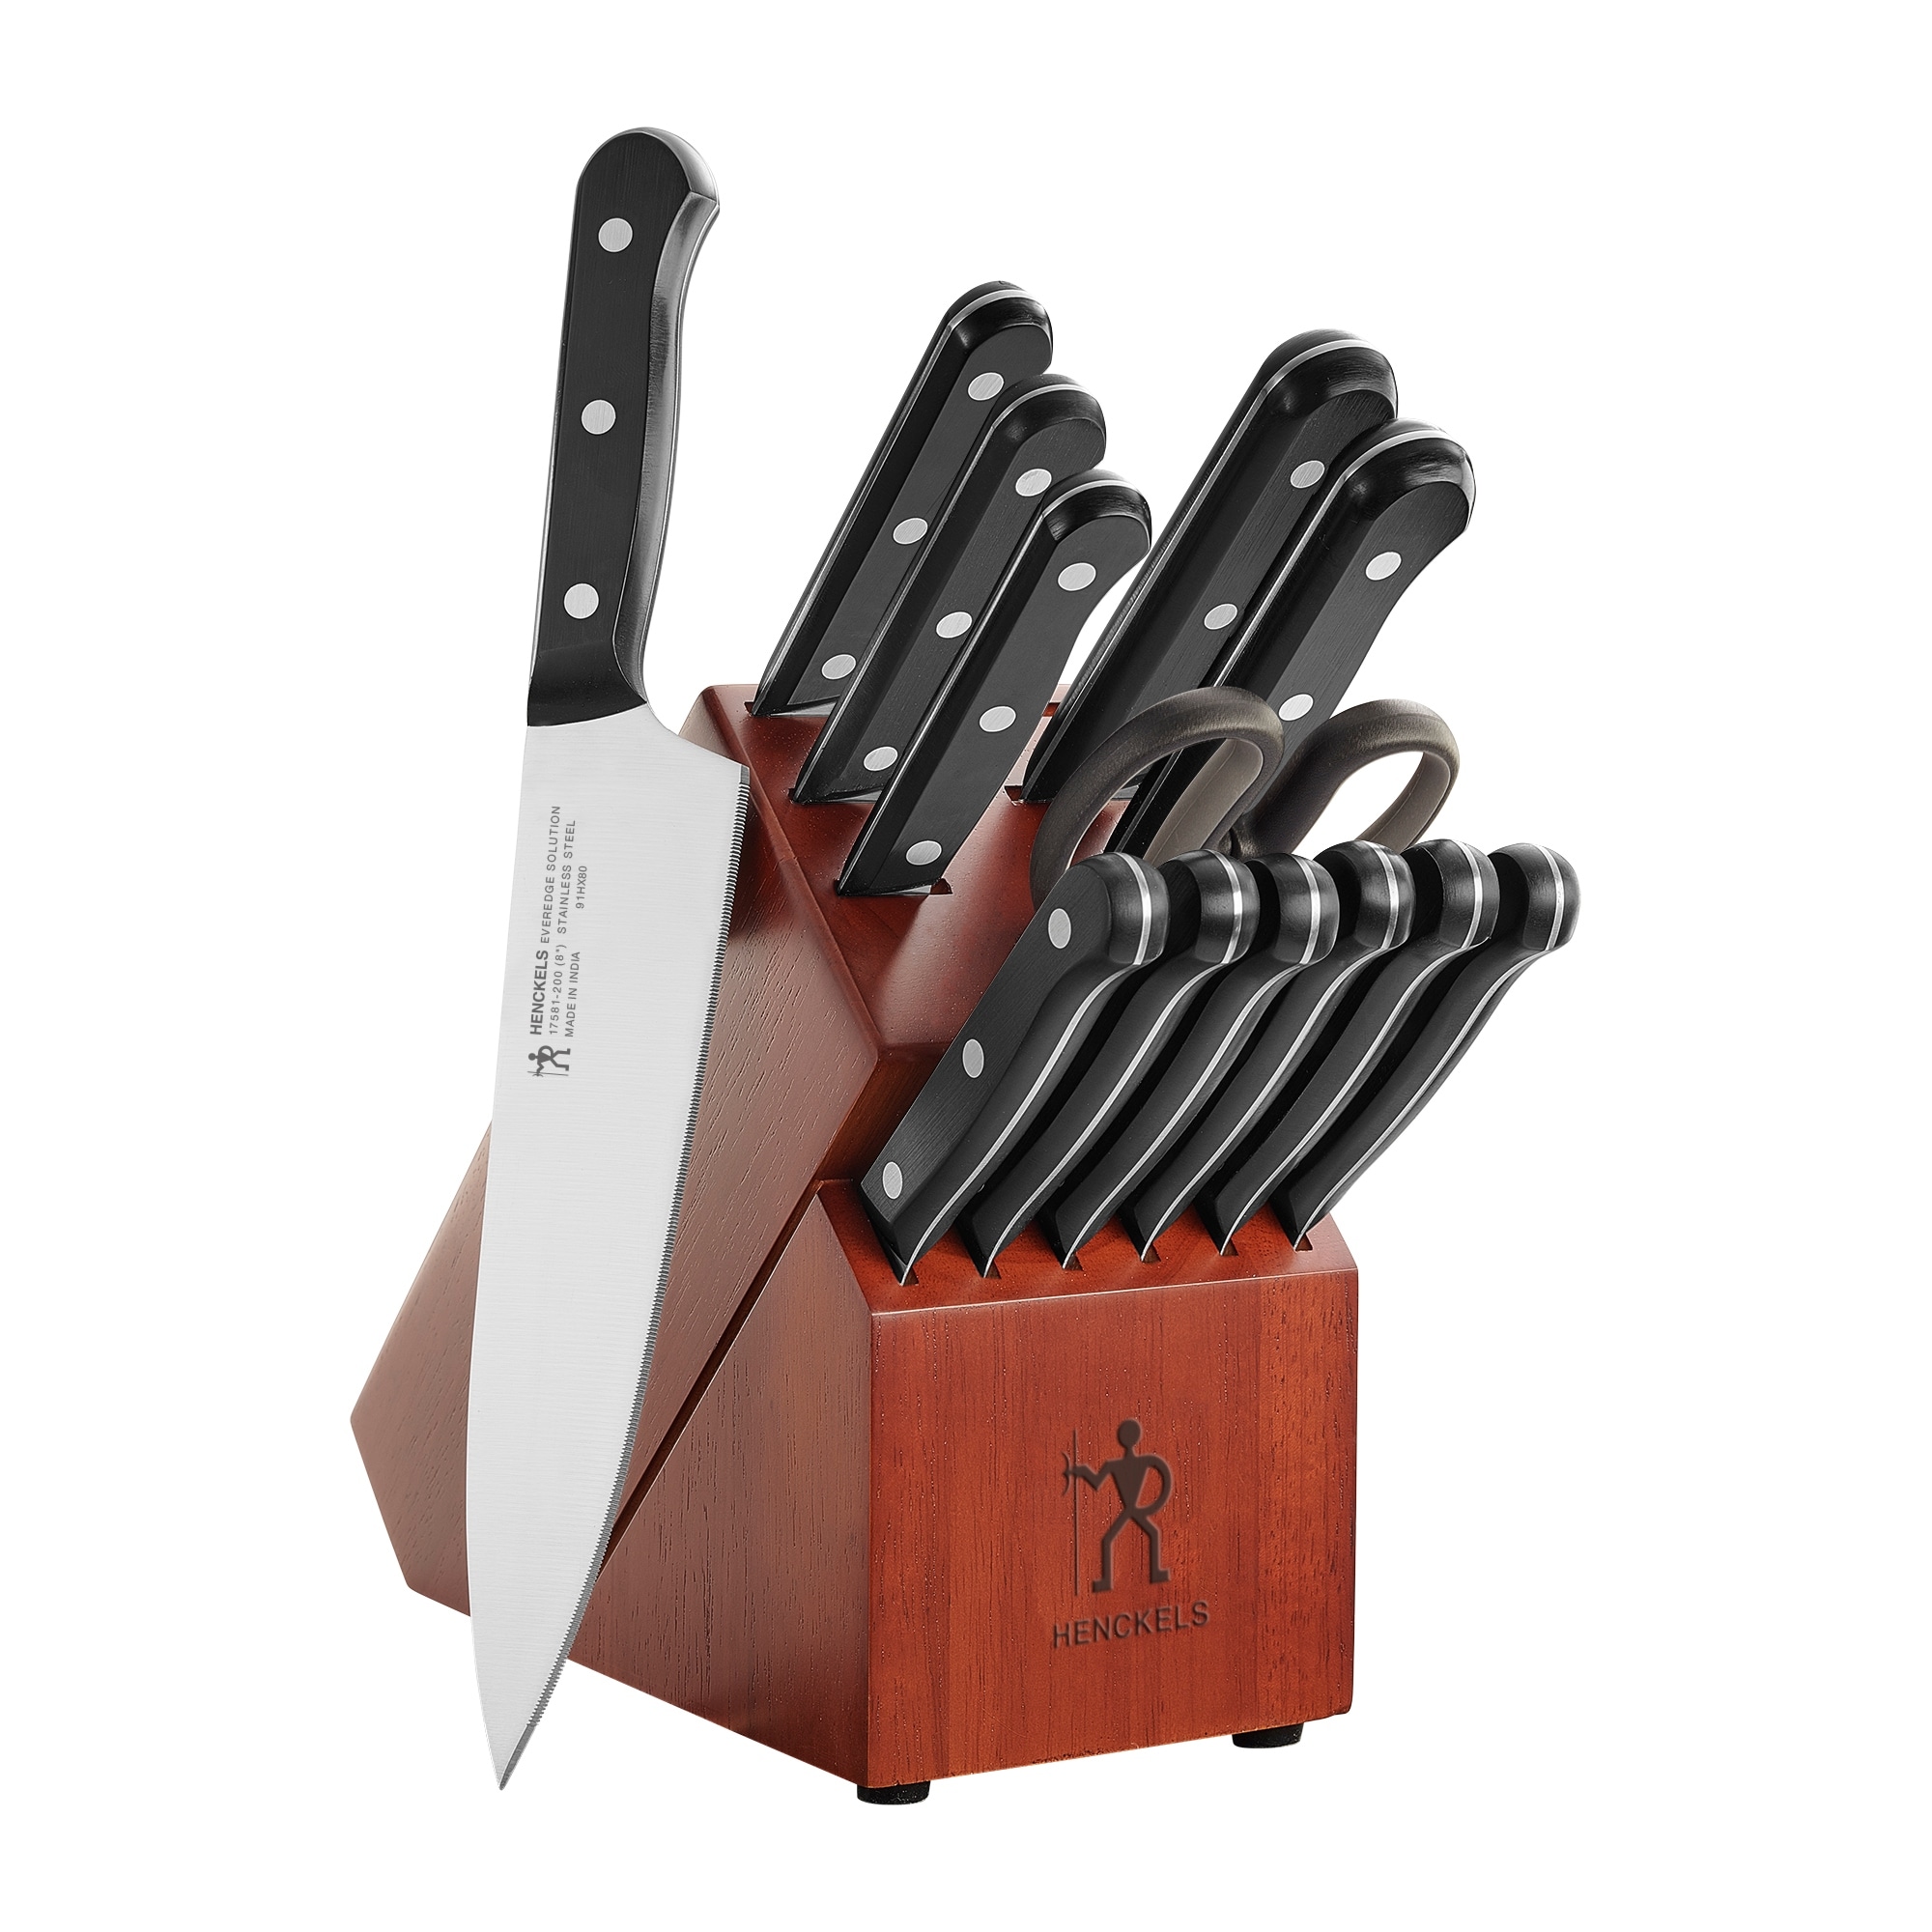 Chicago Cutlery ProHold 14-Piece Block Set - Bed Bath & Beyond